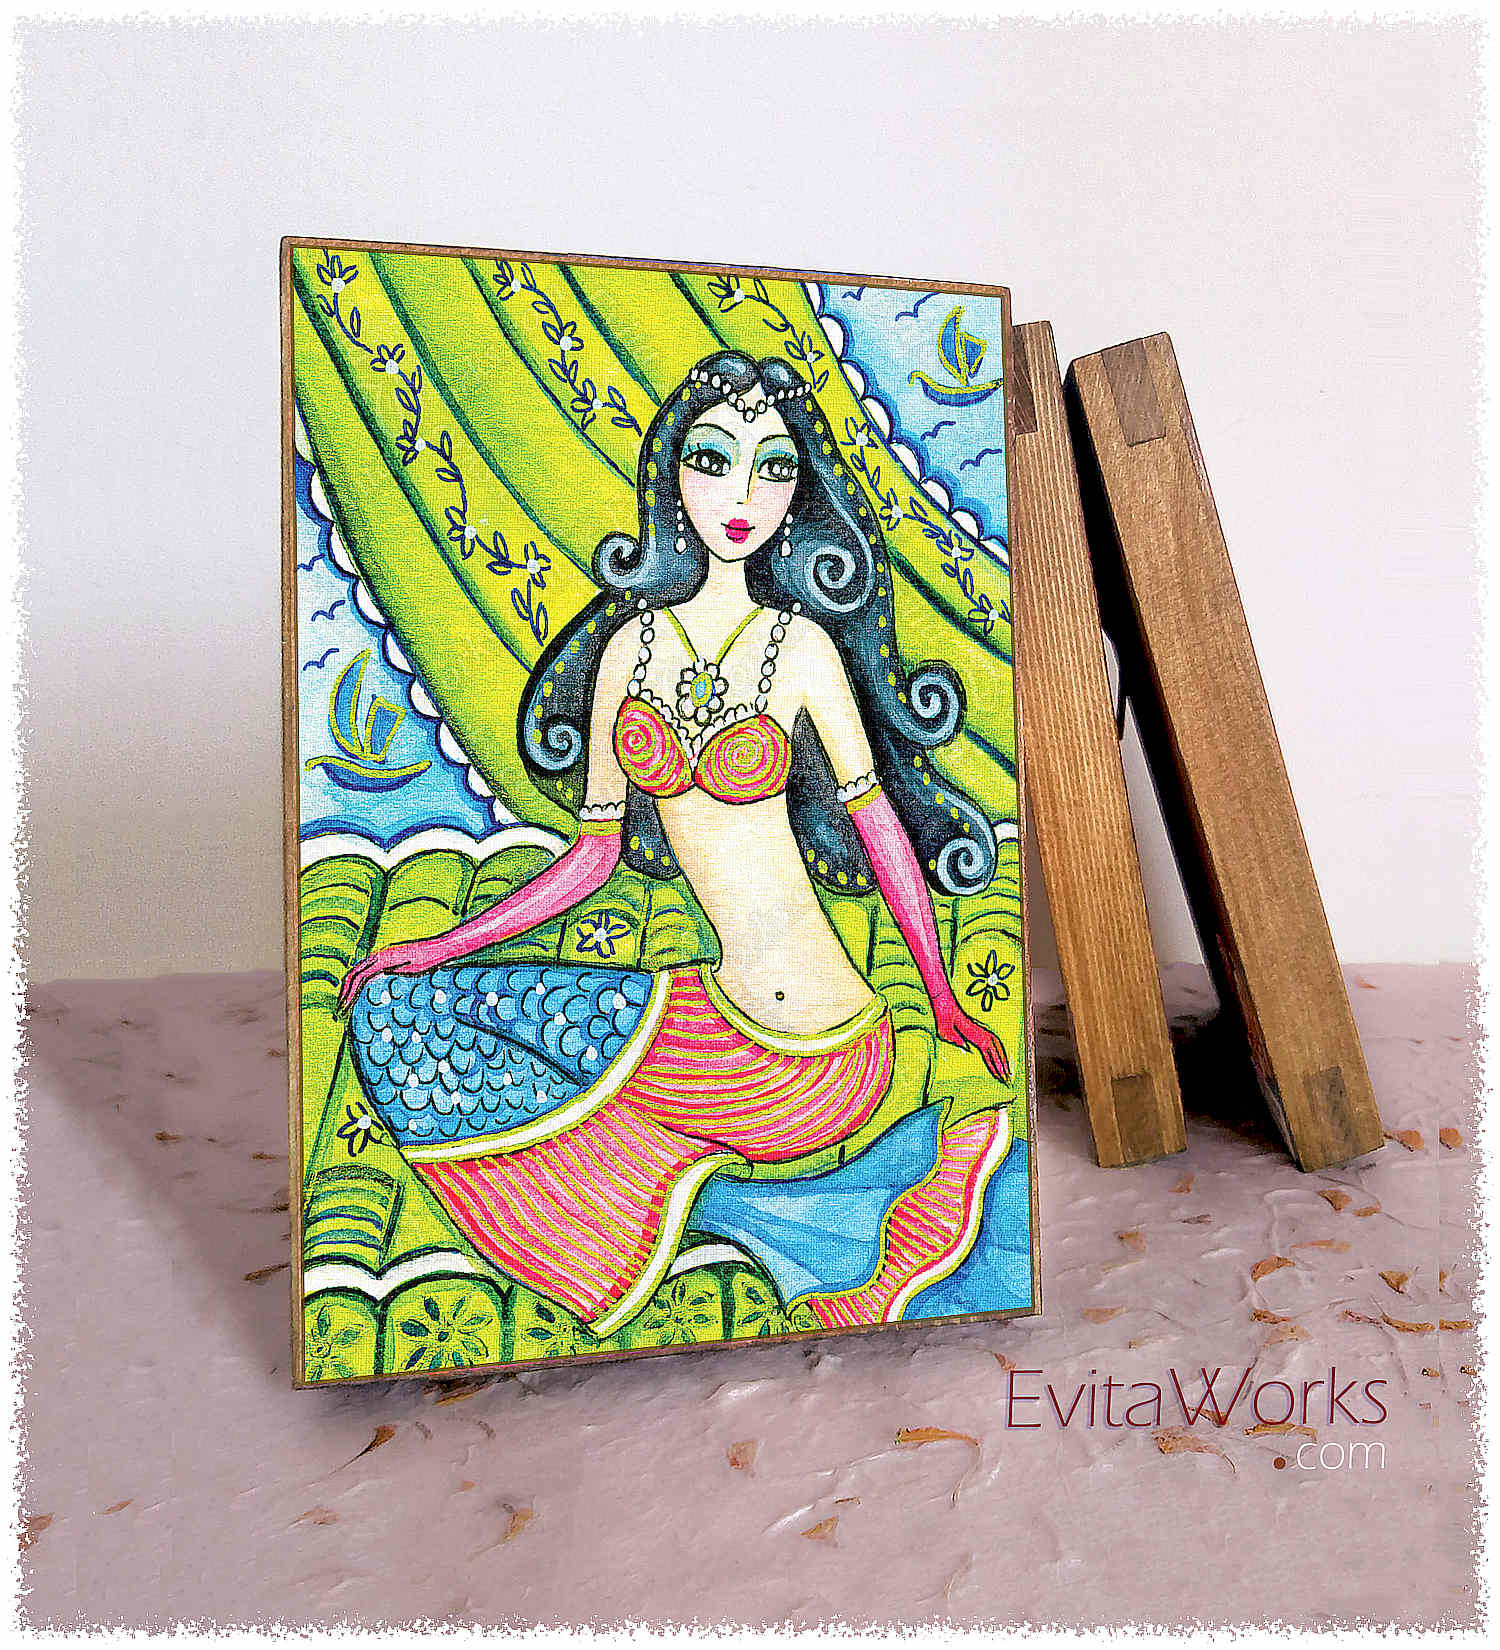 Hit to learn about "Mermaid 54, beautiful female creature" on woodblocks